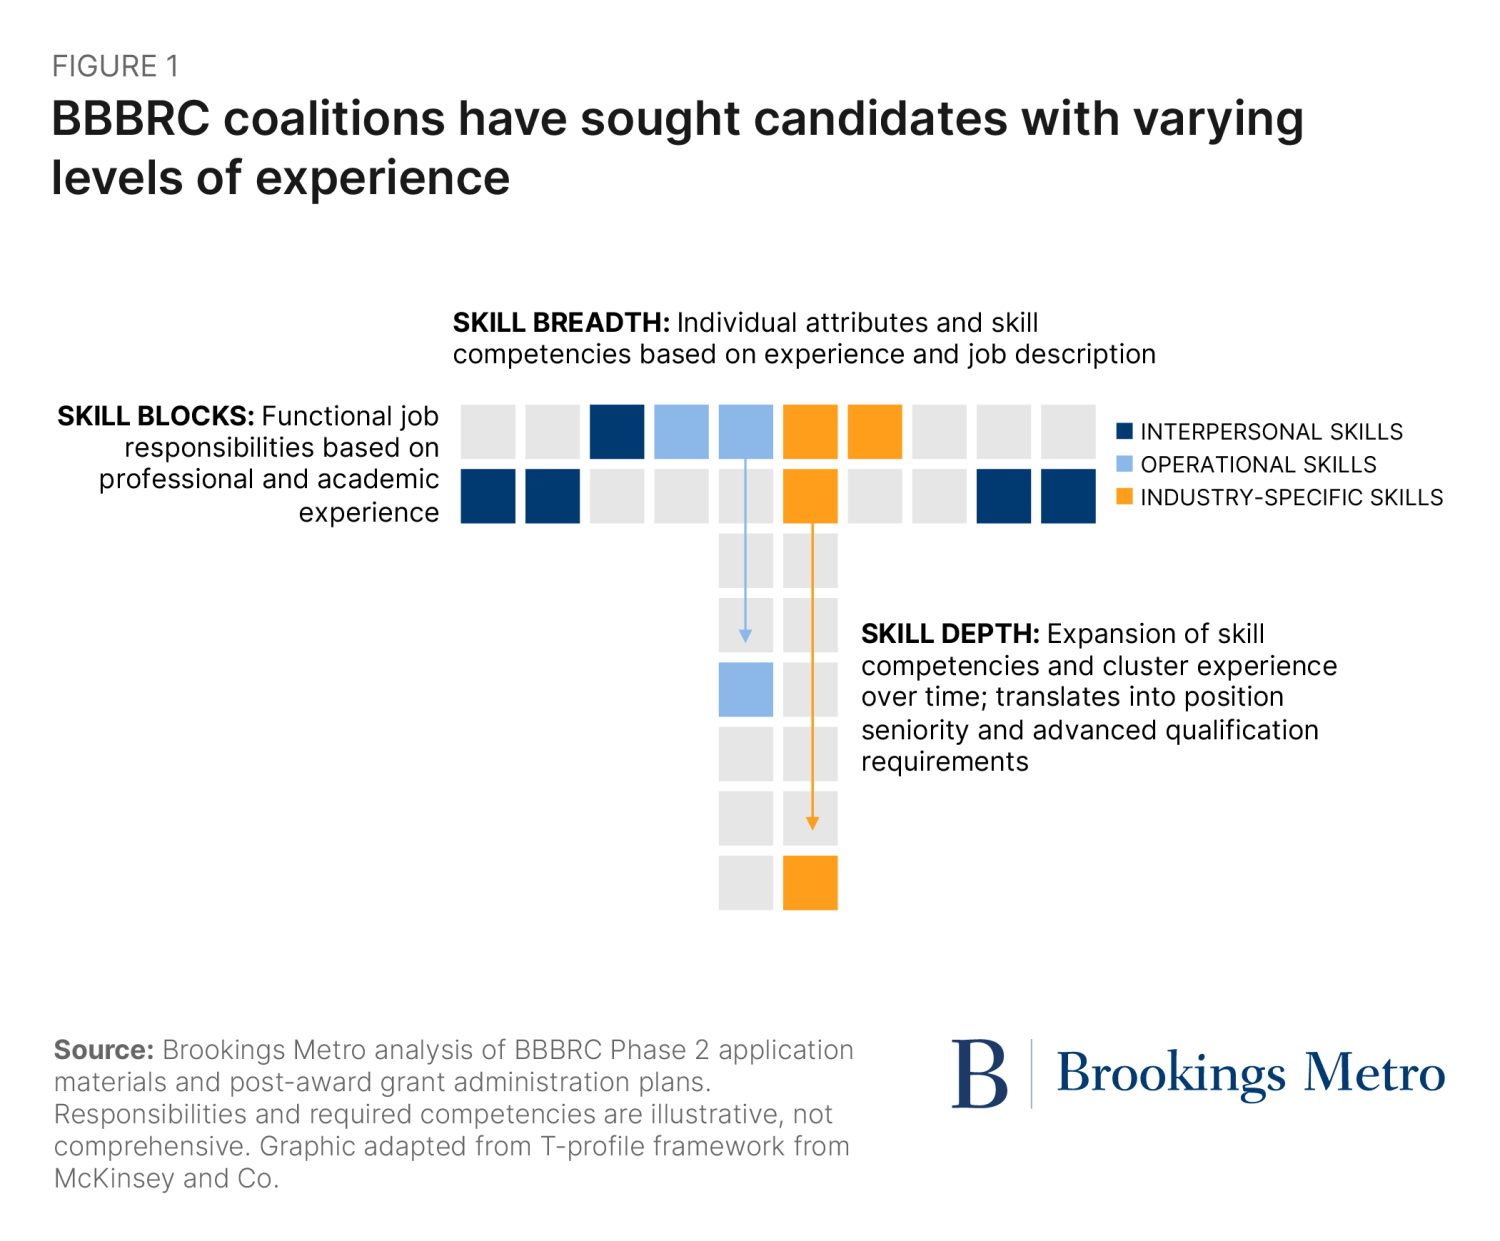 Figure 1: BBBRC coalitions have sought candidates with varying levels of experience